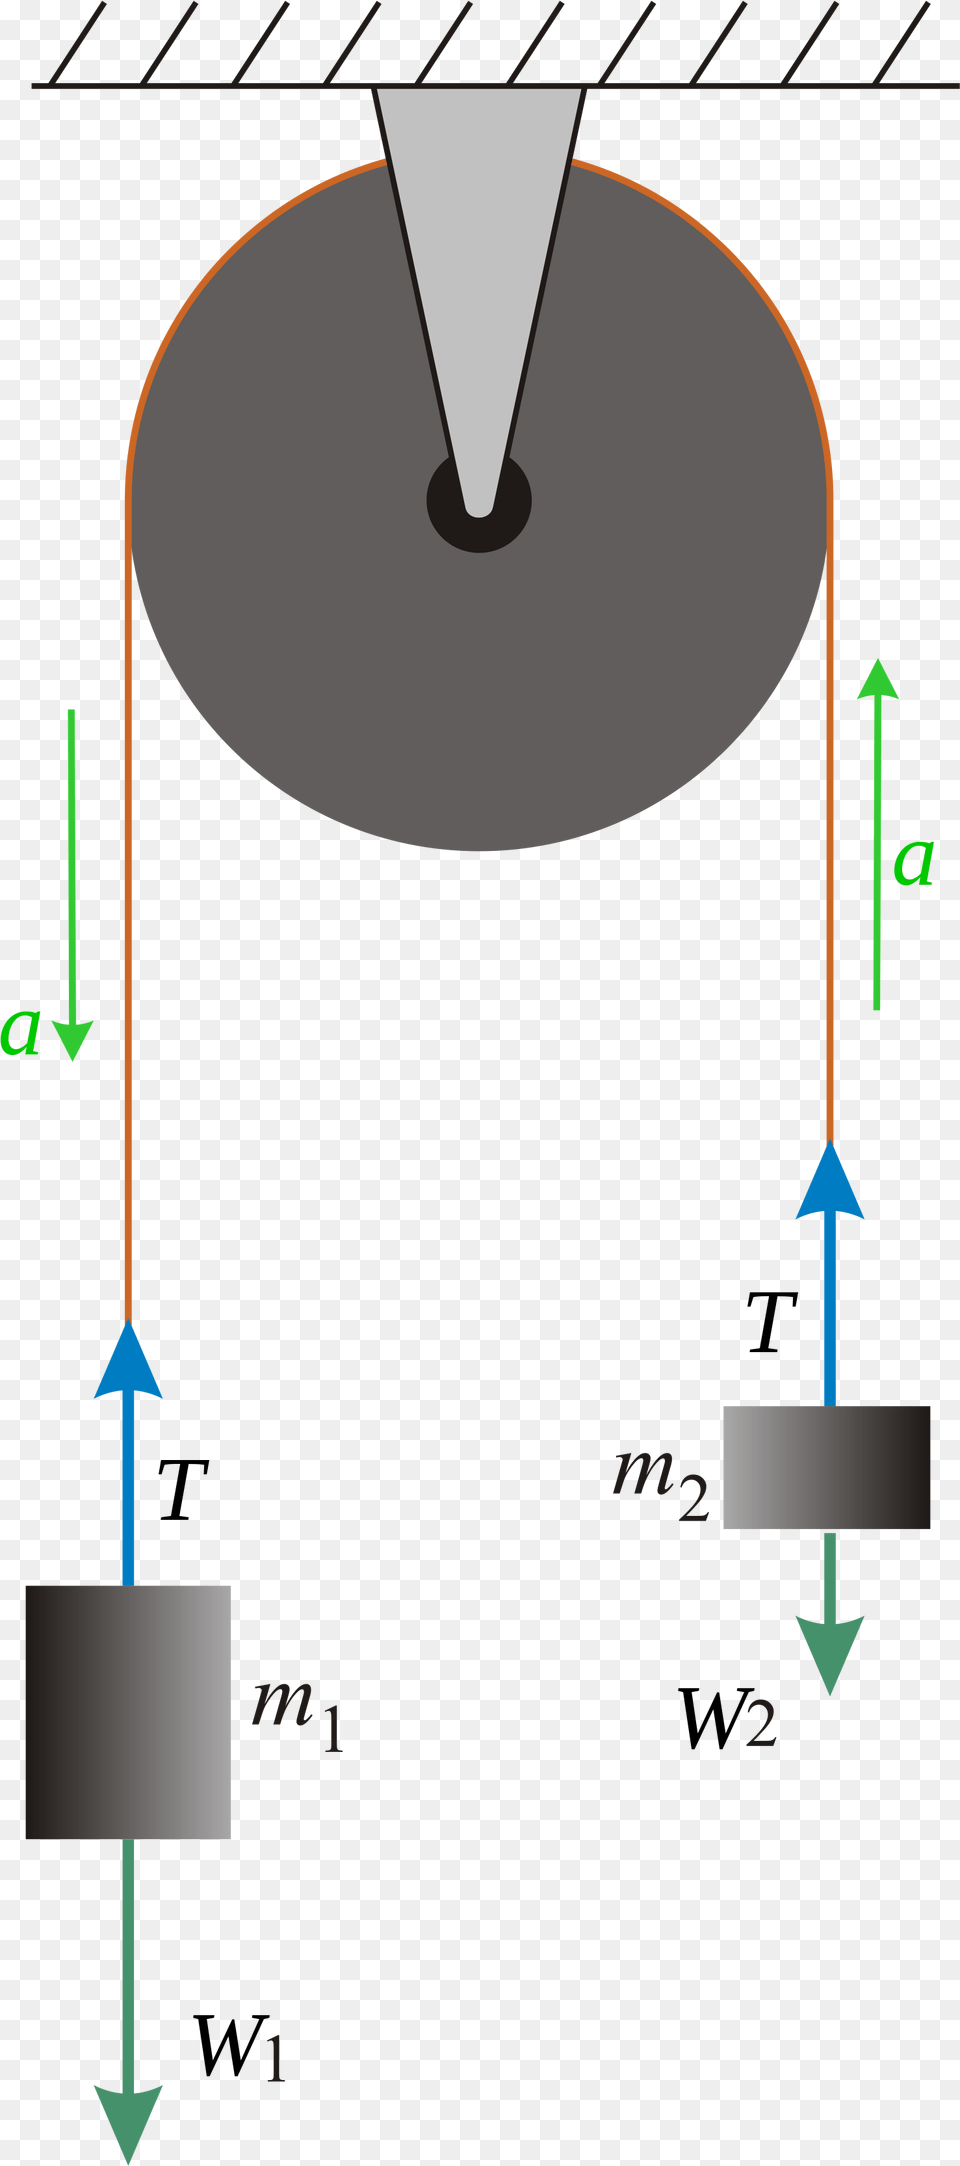 The Body Diagrams Of The Two Hanging Masses Of Newtons Third Law Pulley System, Lighting, Astronomy, Moon, Nature Png